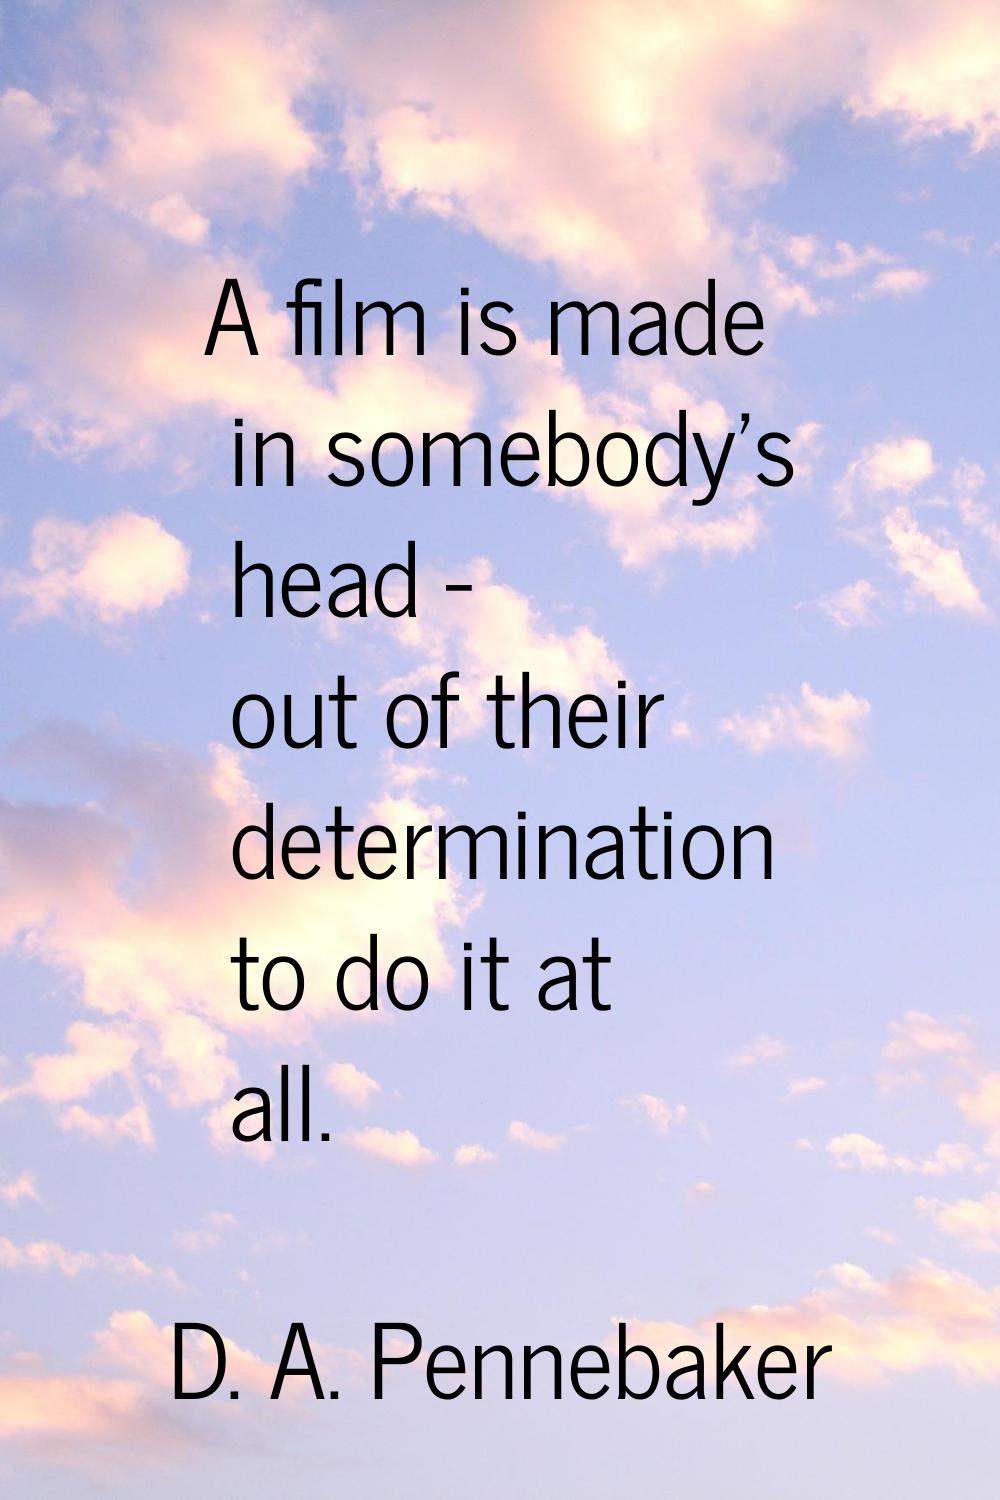 A film is made in somebody's head - out of their determination to do it at all.